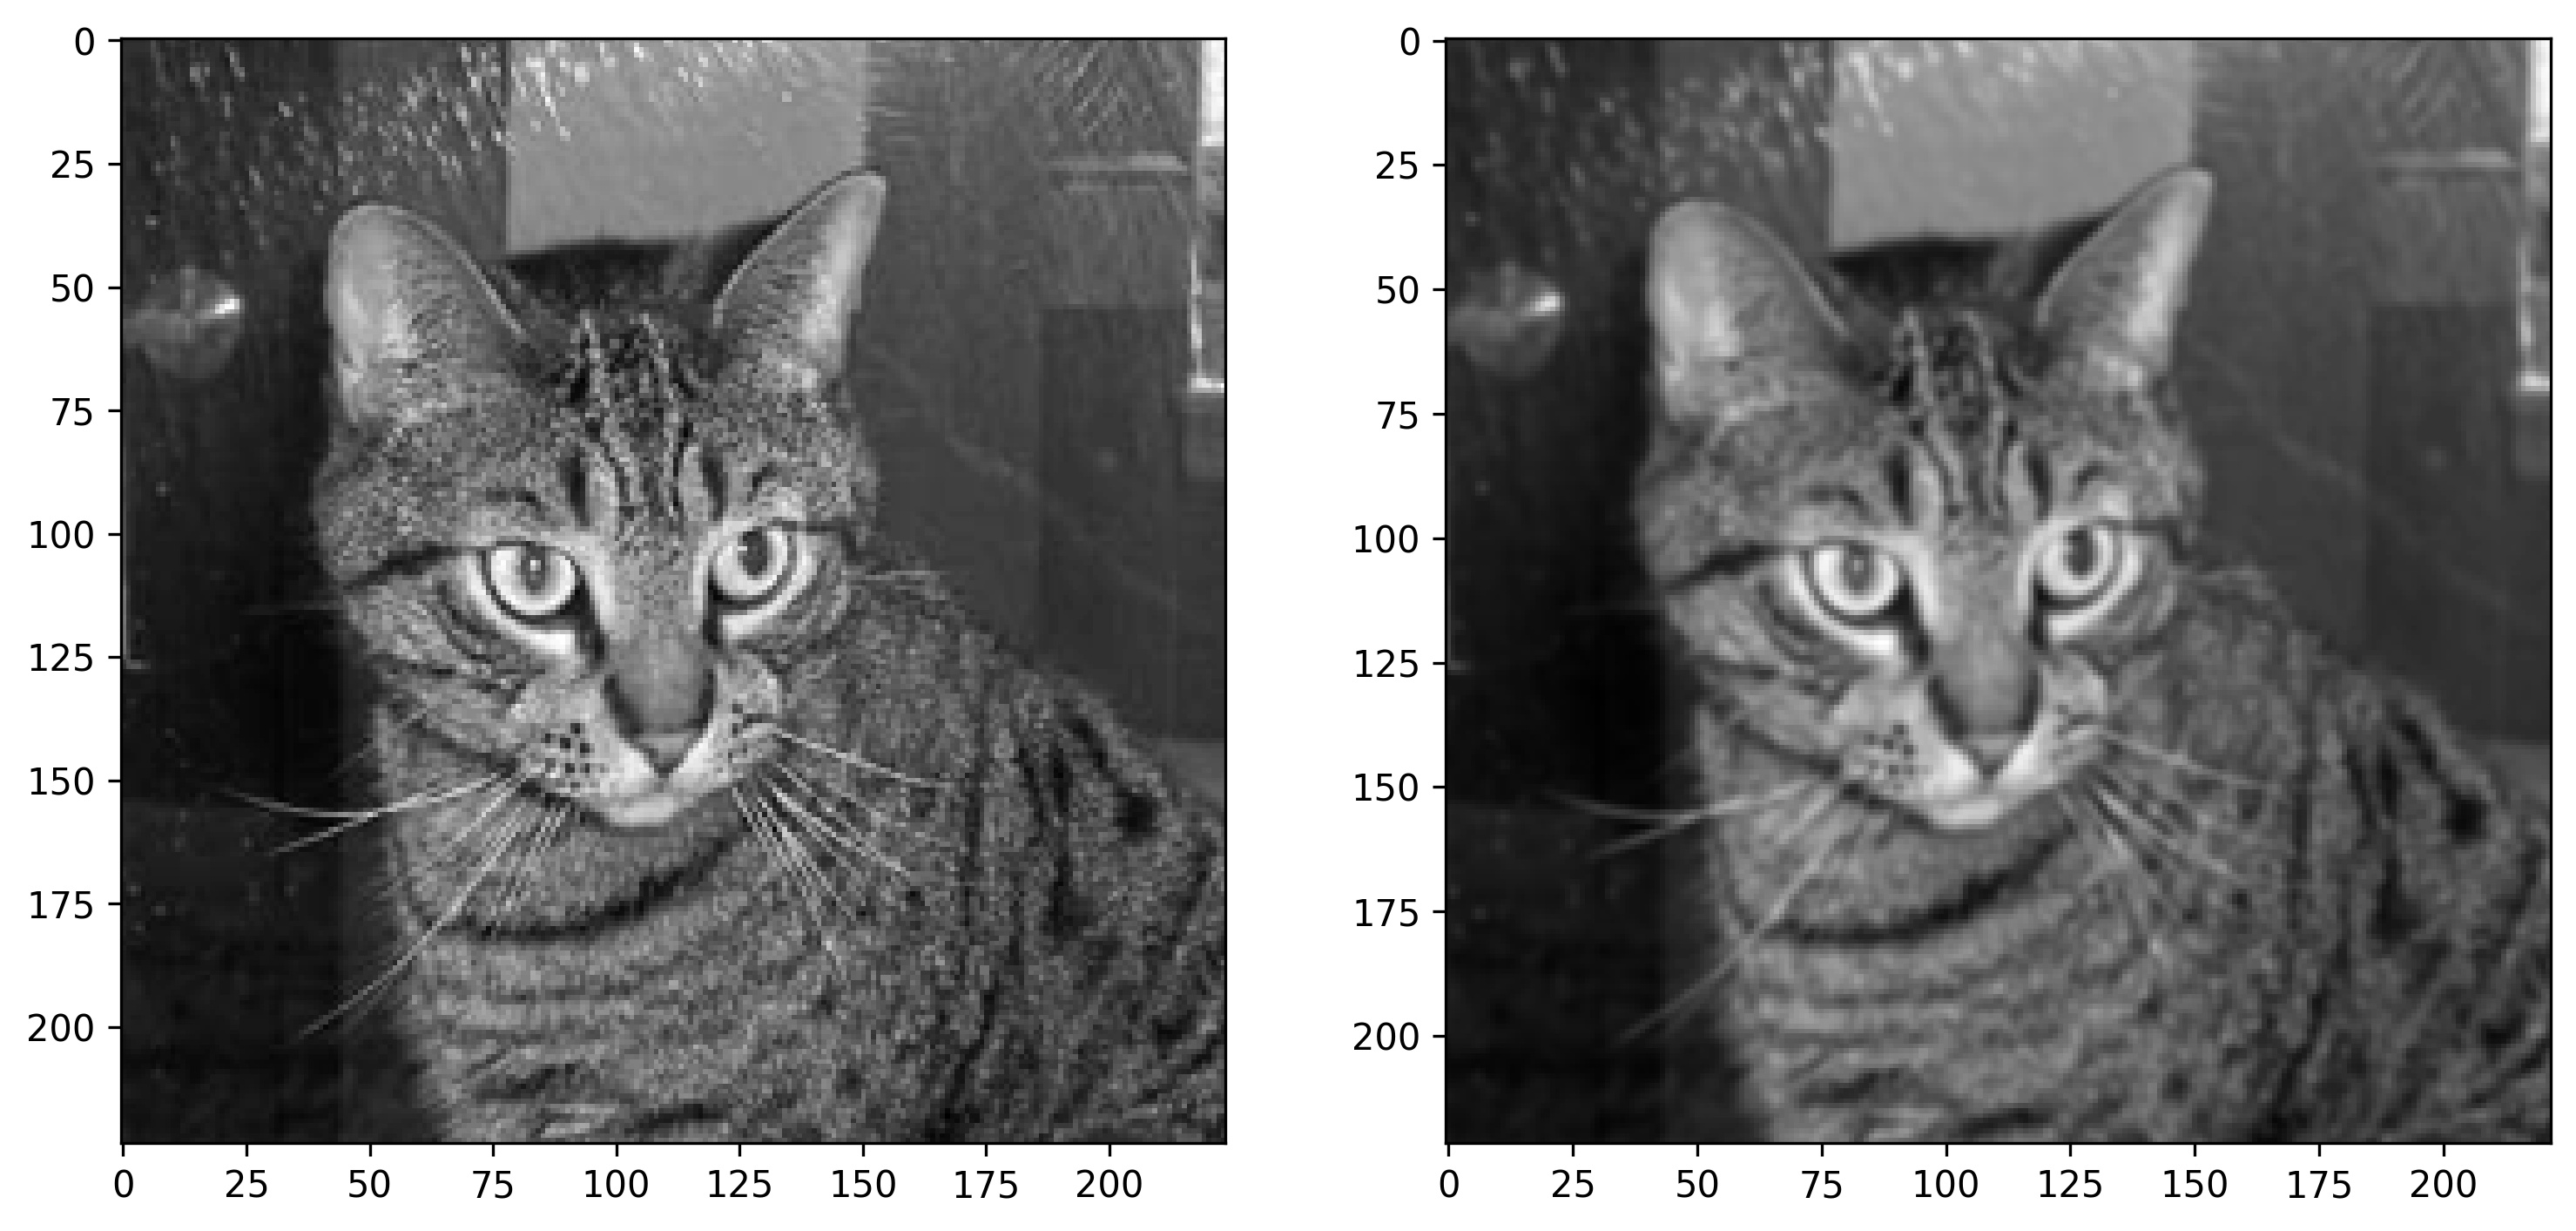 Image 10 — Cat image before and after blurring (image by author)